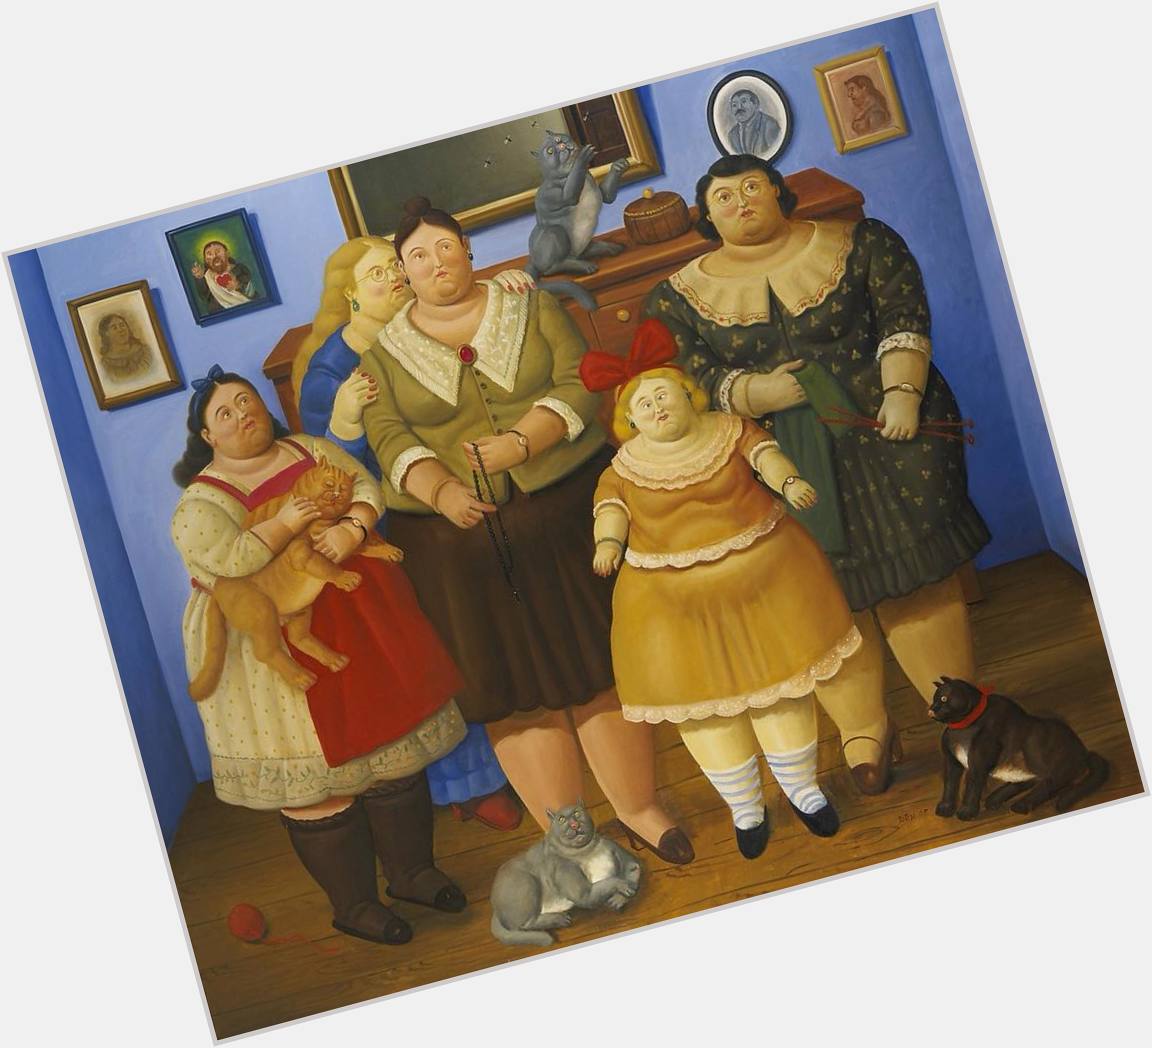 Happy birthday Fernando Botero! Famous for his large exaggerated figures and political humor. \"Le Sorelle.\" 